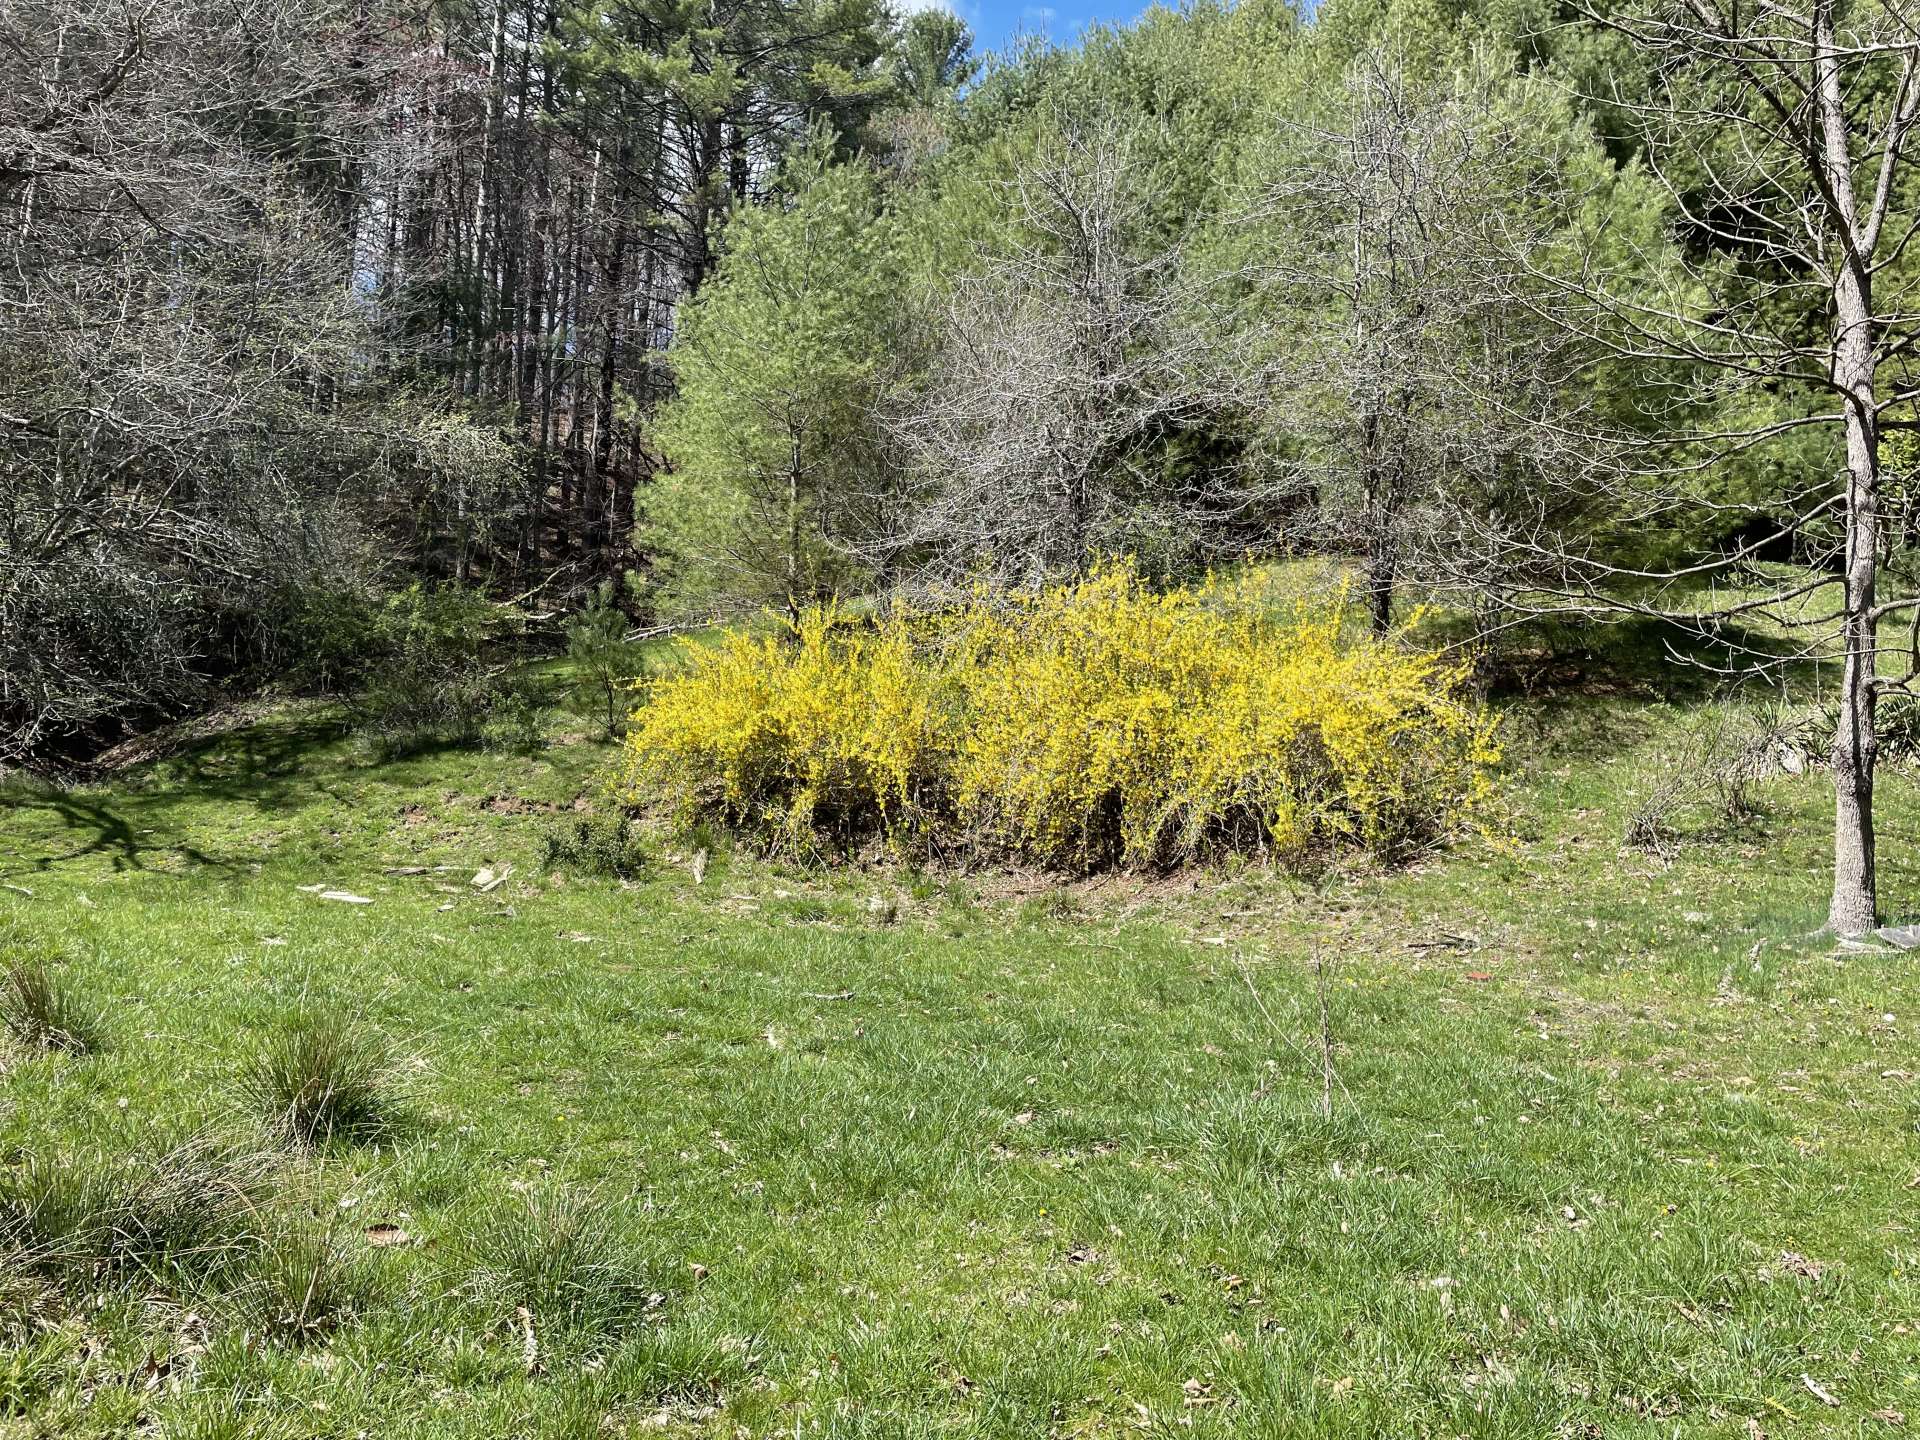 Blooming forsythia on the property.